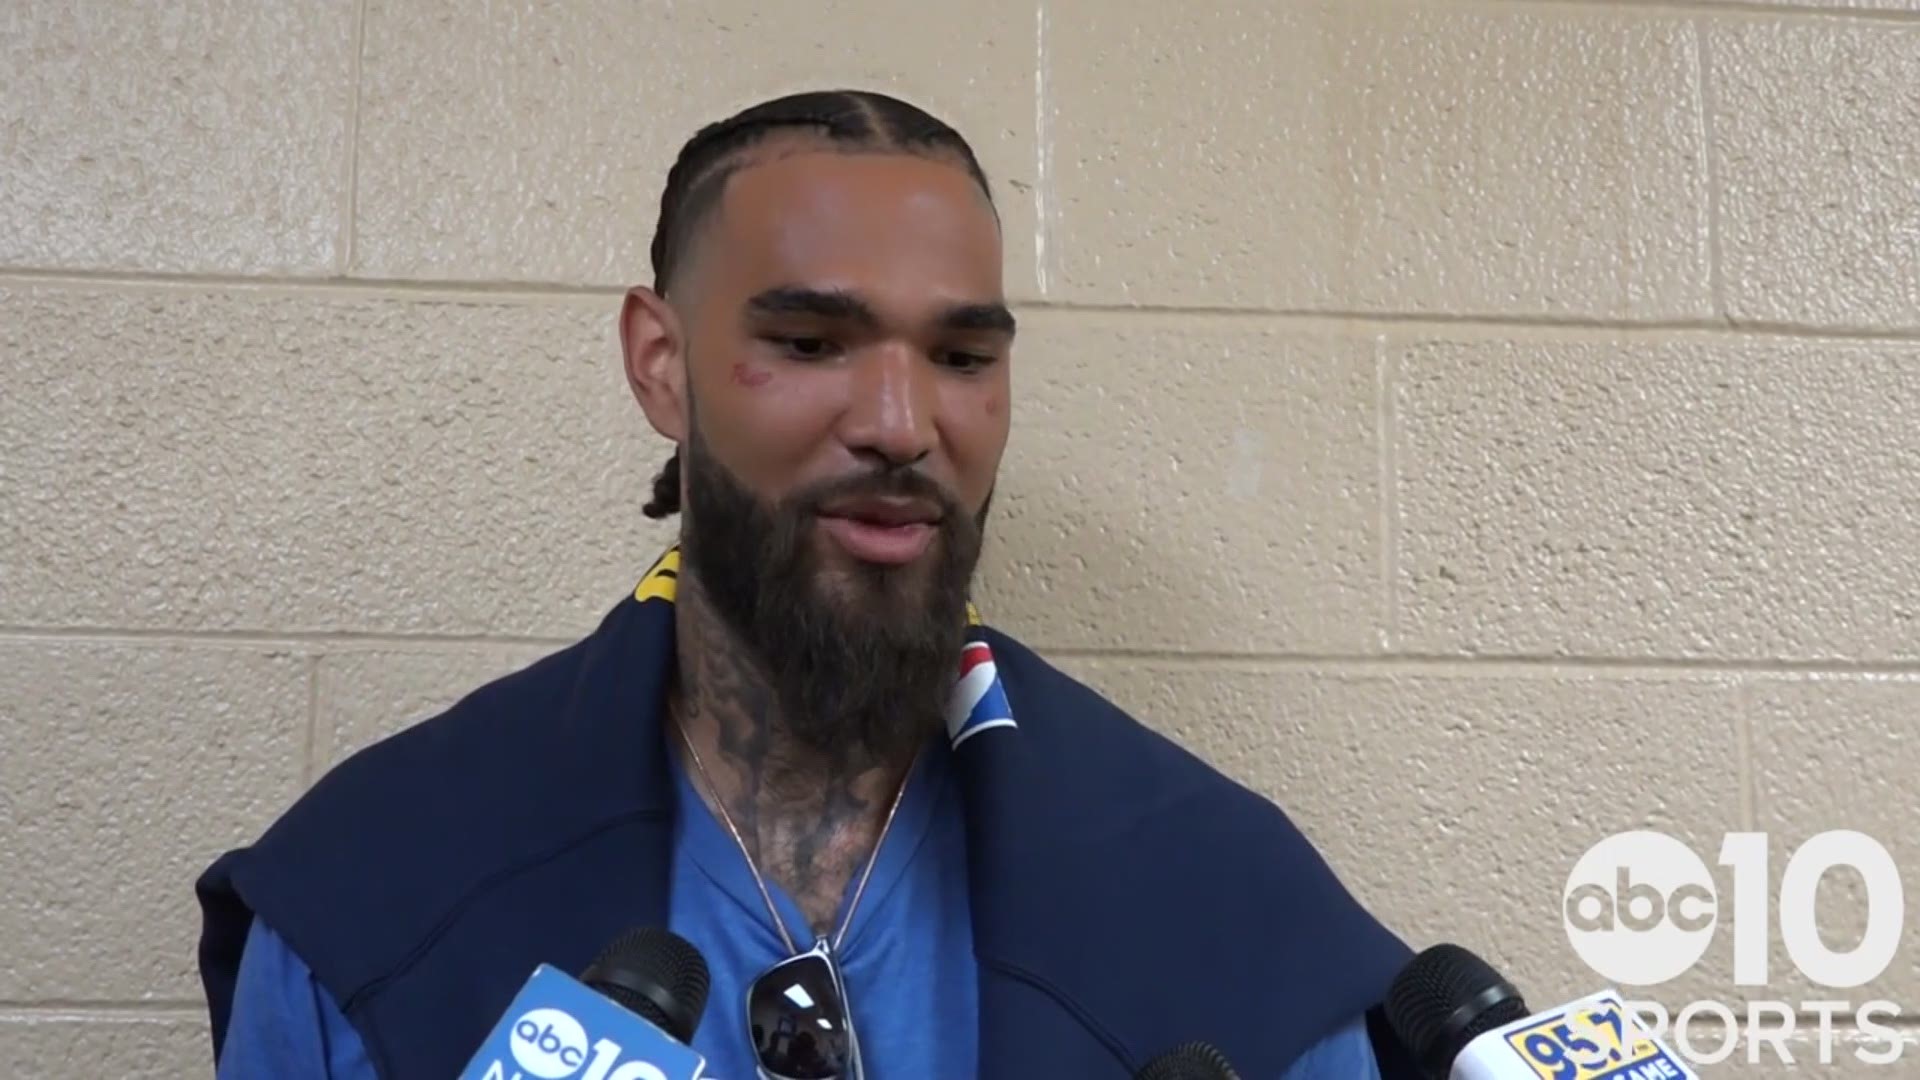 Willie Cauley-Stein talks for the first time as a member of the Warriors, when he figured he wouldn’t be coming back to Sacramento, what he wants Sacramento fans to know as he departs and what attracted him most to Golden State.